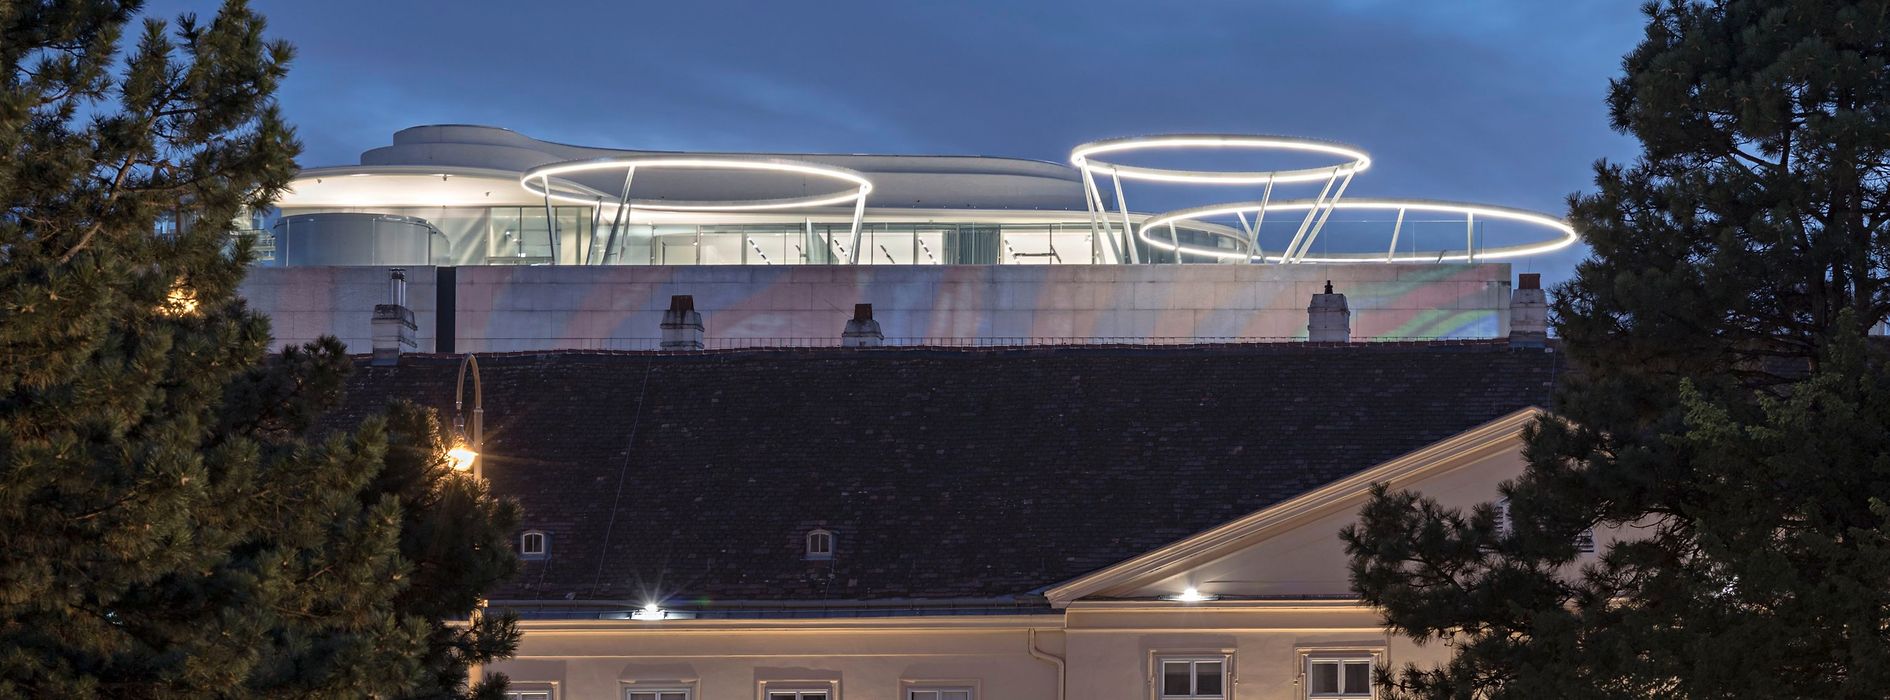 Roof terrace on the Leopold Museum in the MuseumsQuartier, Vienna